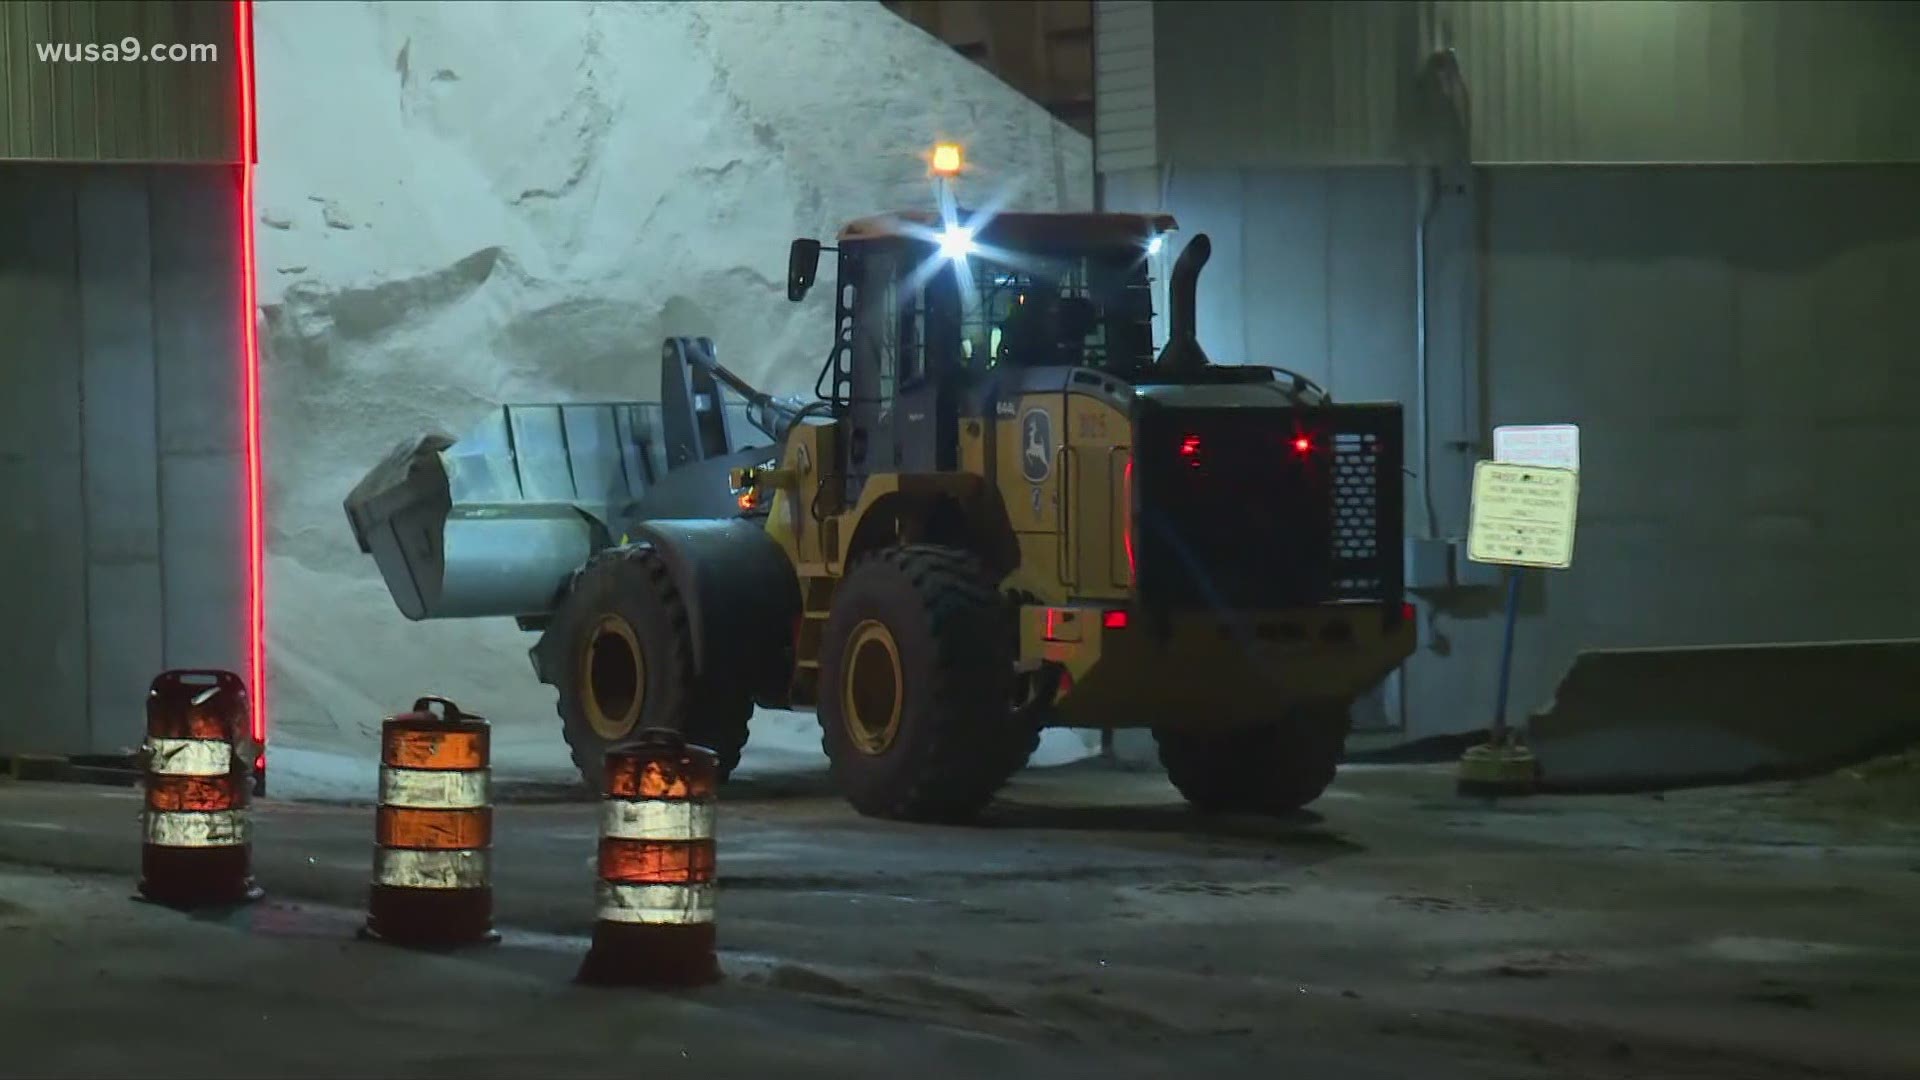 New protocols are in place for road crews during winter weather